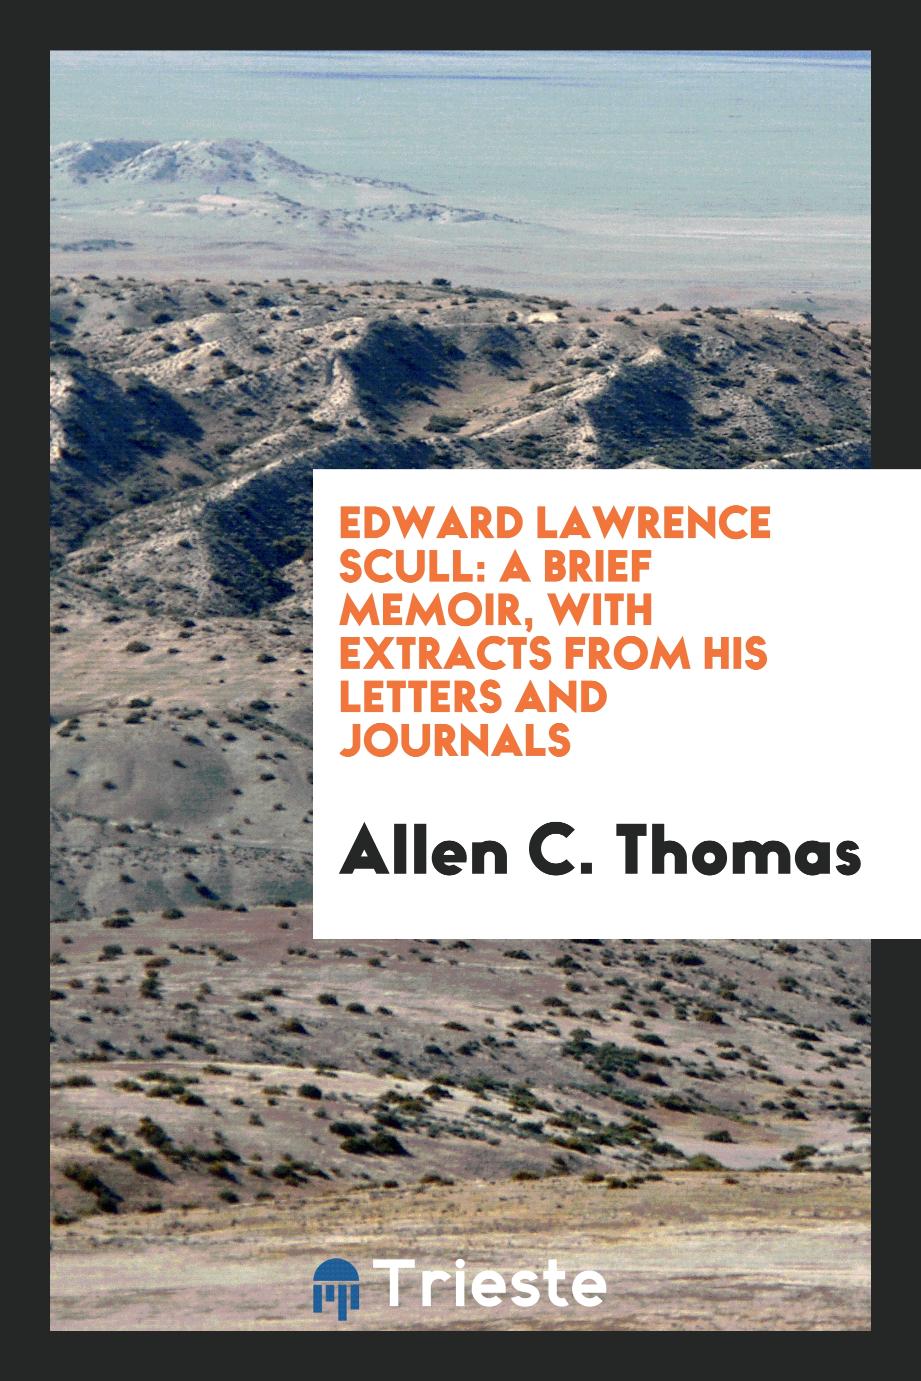 Edward Lawrence Scull: A Brief Memoir, with Extracts from His Letters and Journals